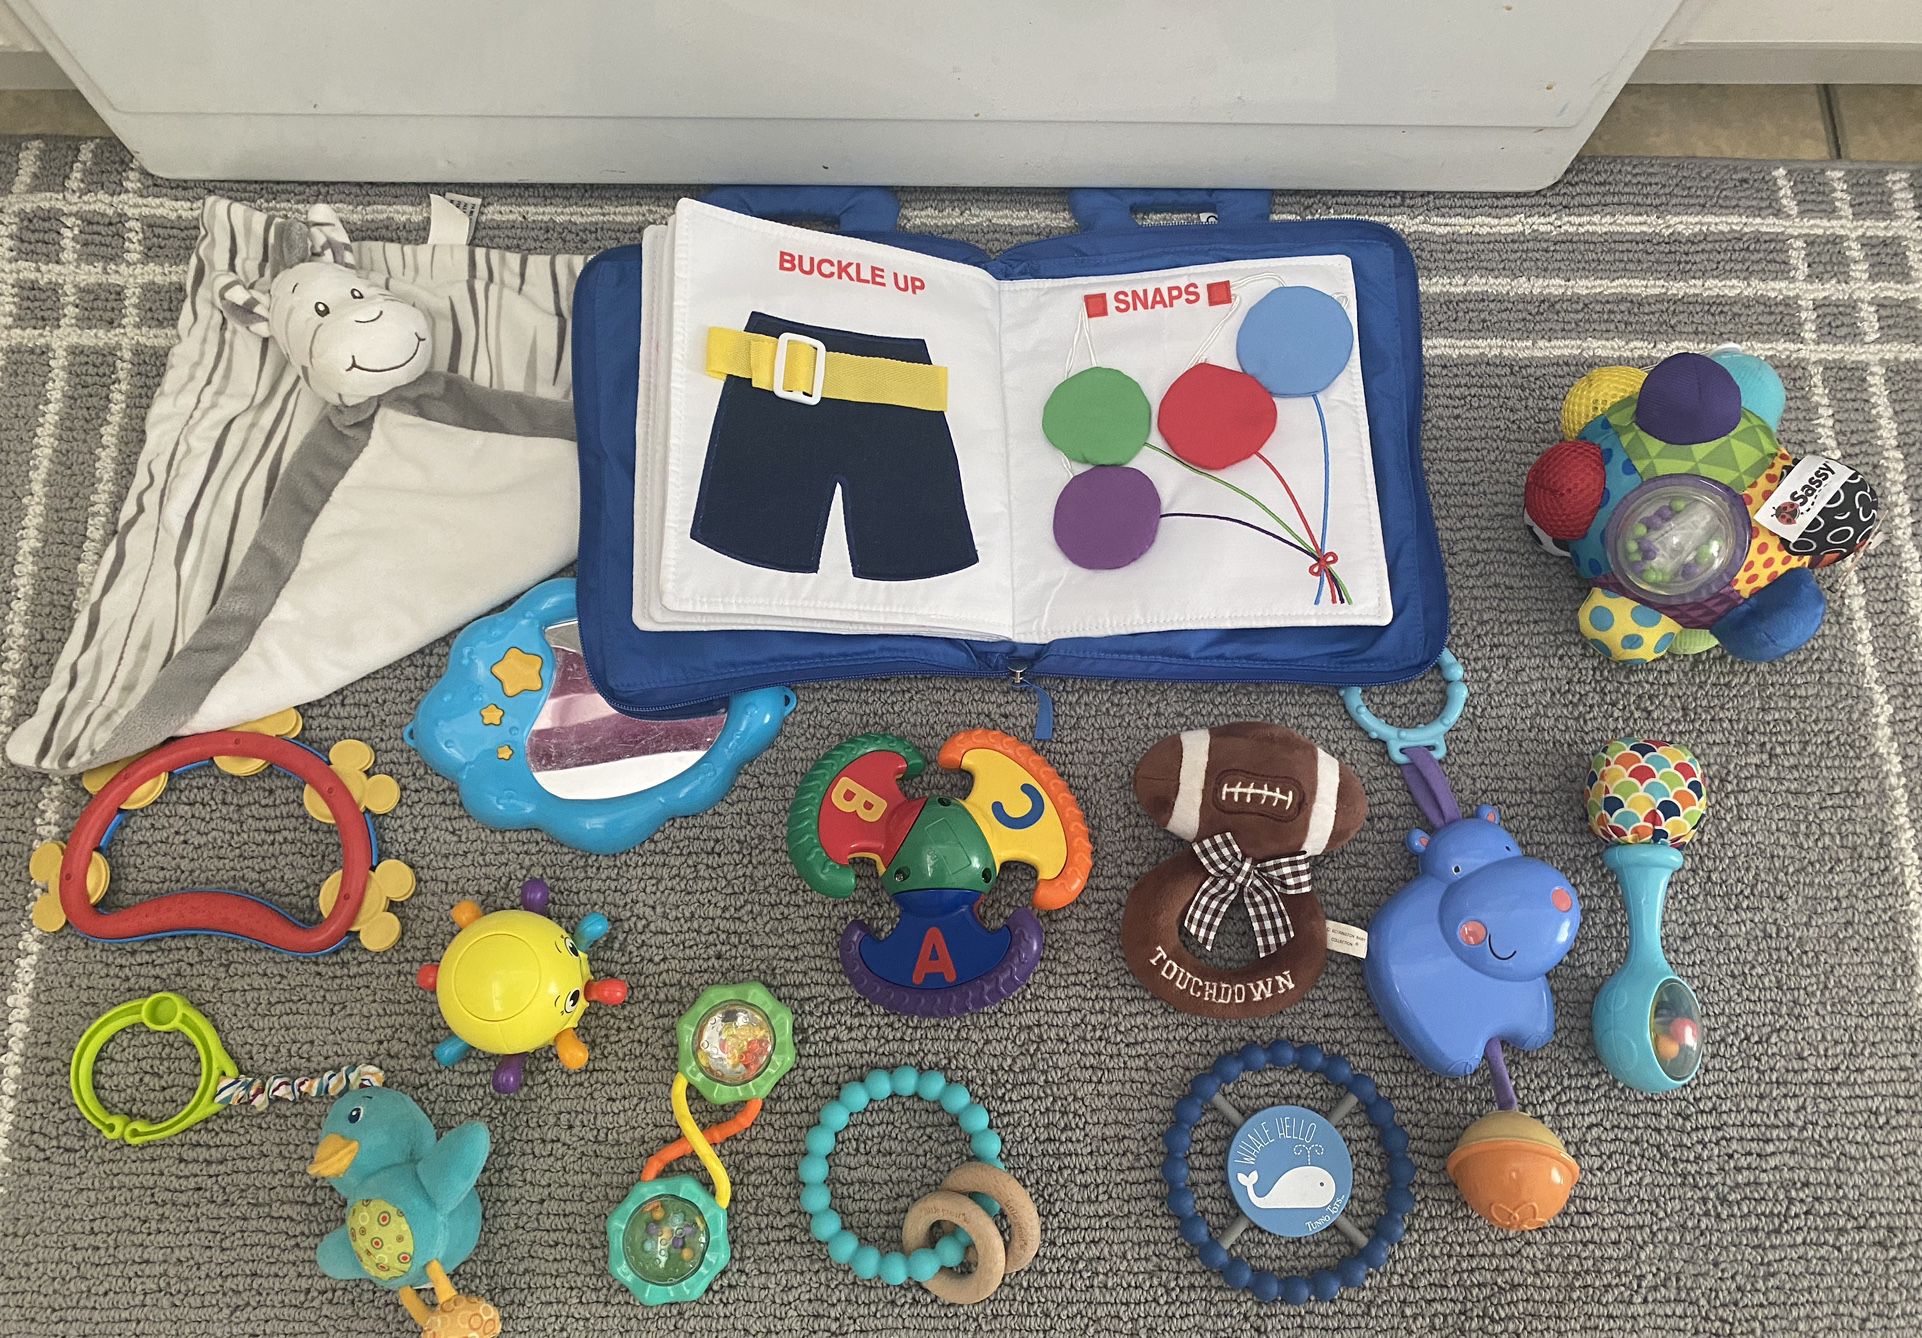 Baby Toy Lot Of Rattles Teethers Soft Books 